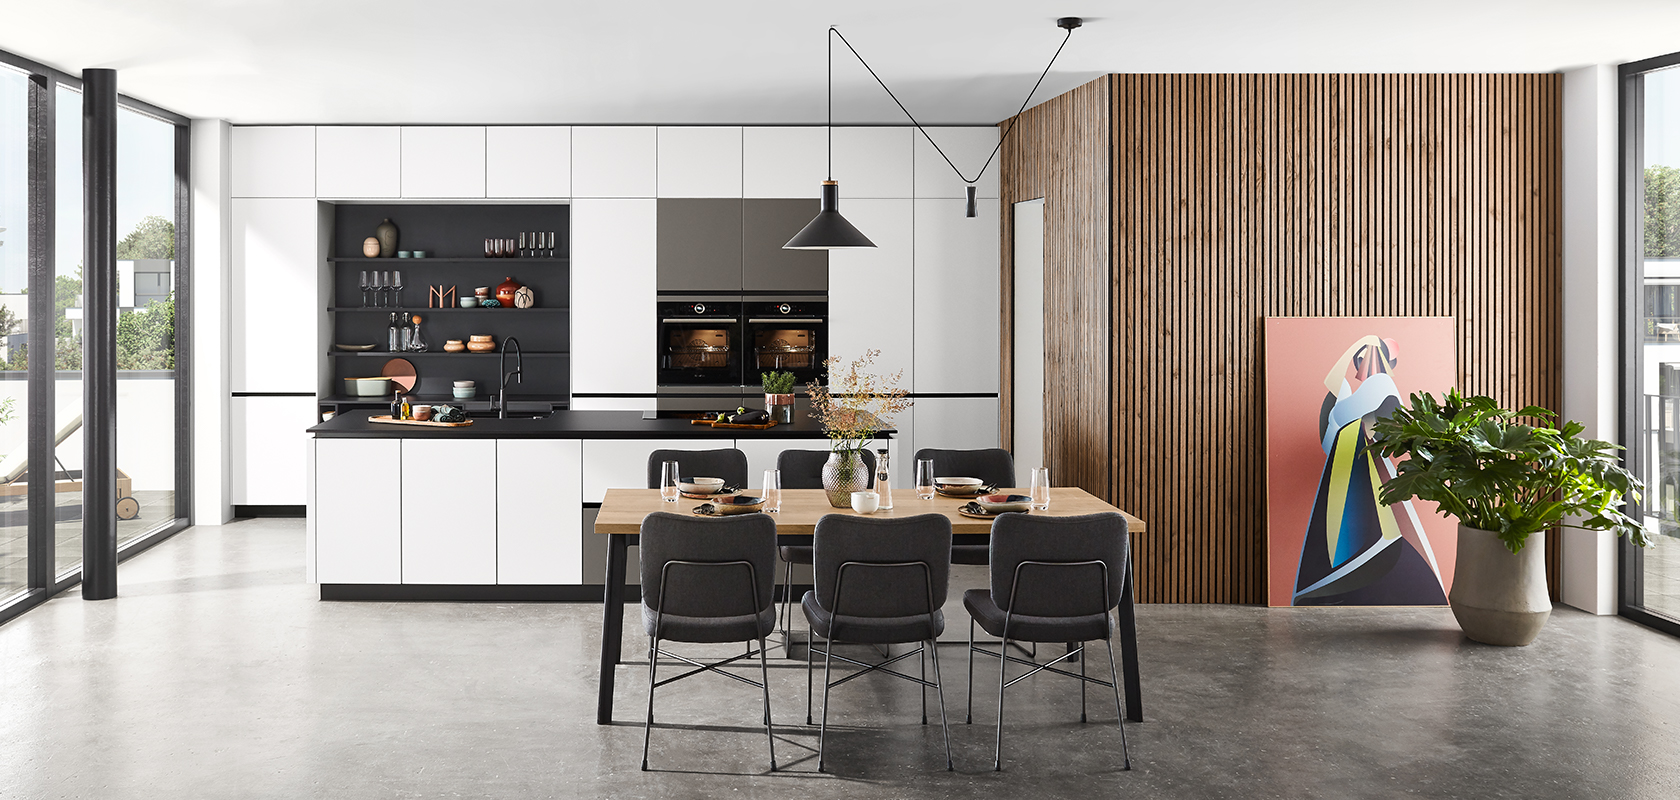 Modern kitchen interior with sleek black and white cabinetry, wooden accents, and a dining area with stylish furniture under elegant pendant lights.